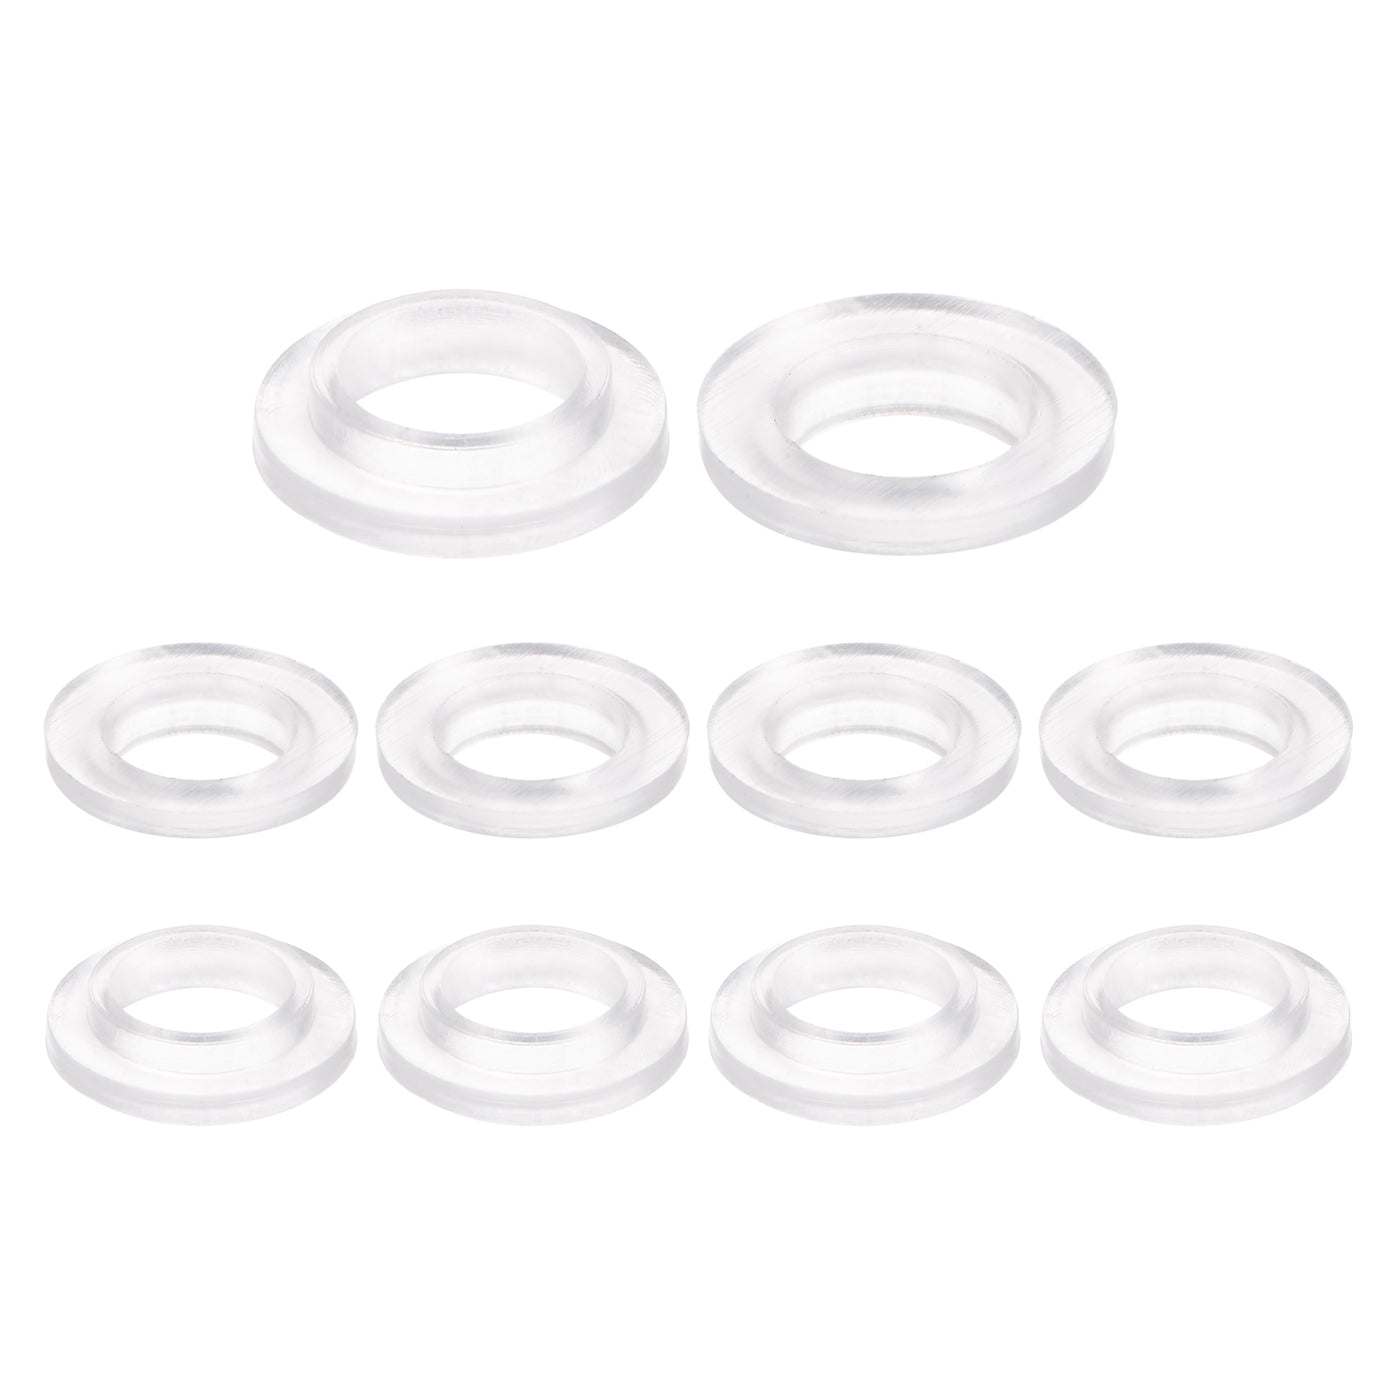 uxcell Uxcell 10pcs Flanged Nylon Bushings 8.1mm ID 10.1mm OD 3.1mm Length, Translucent